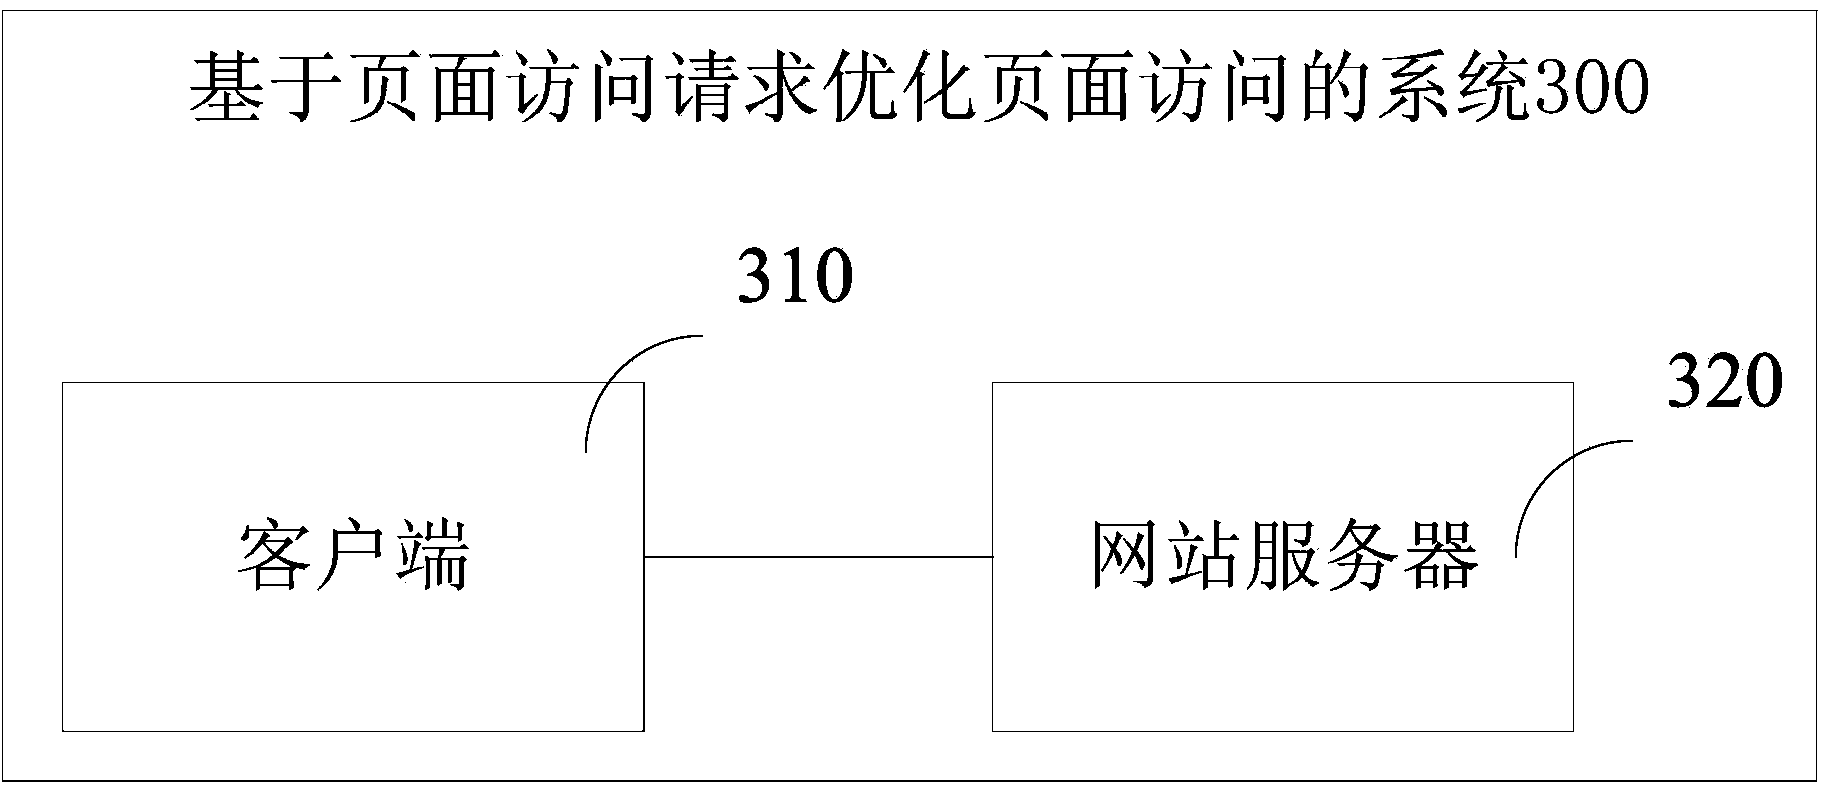 Method and system for optimizing webpage access based on webpage access requests